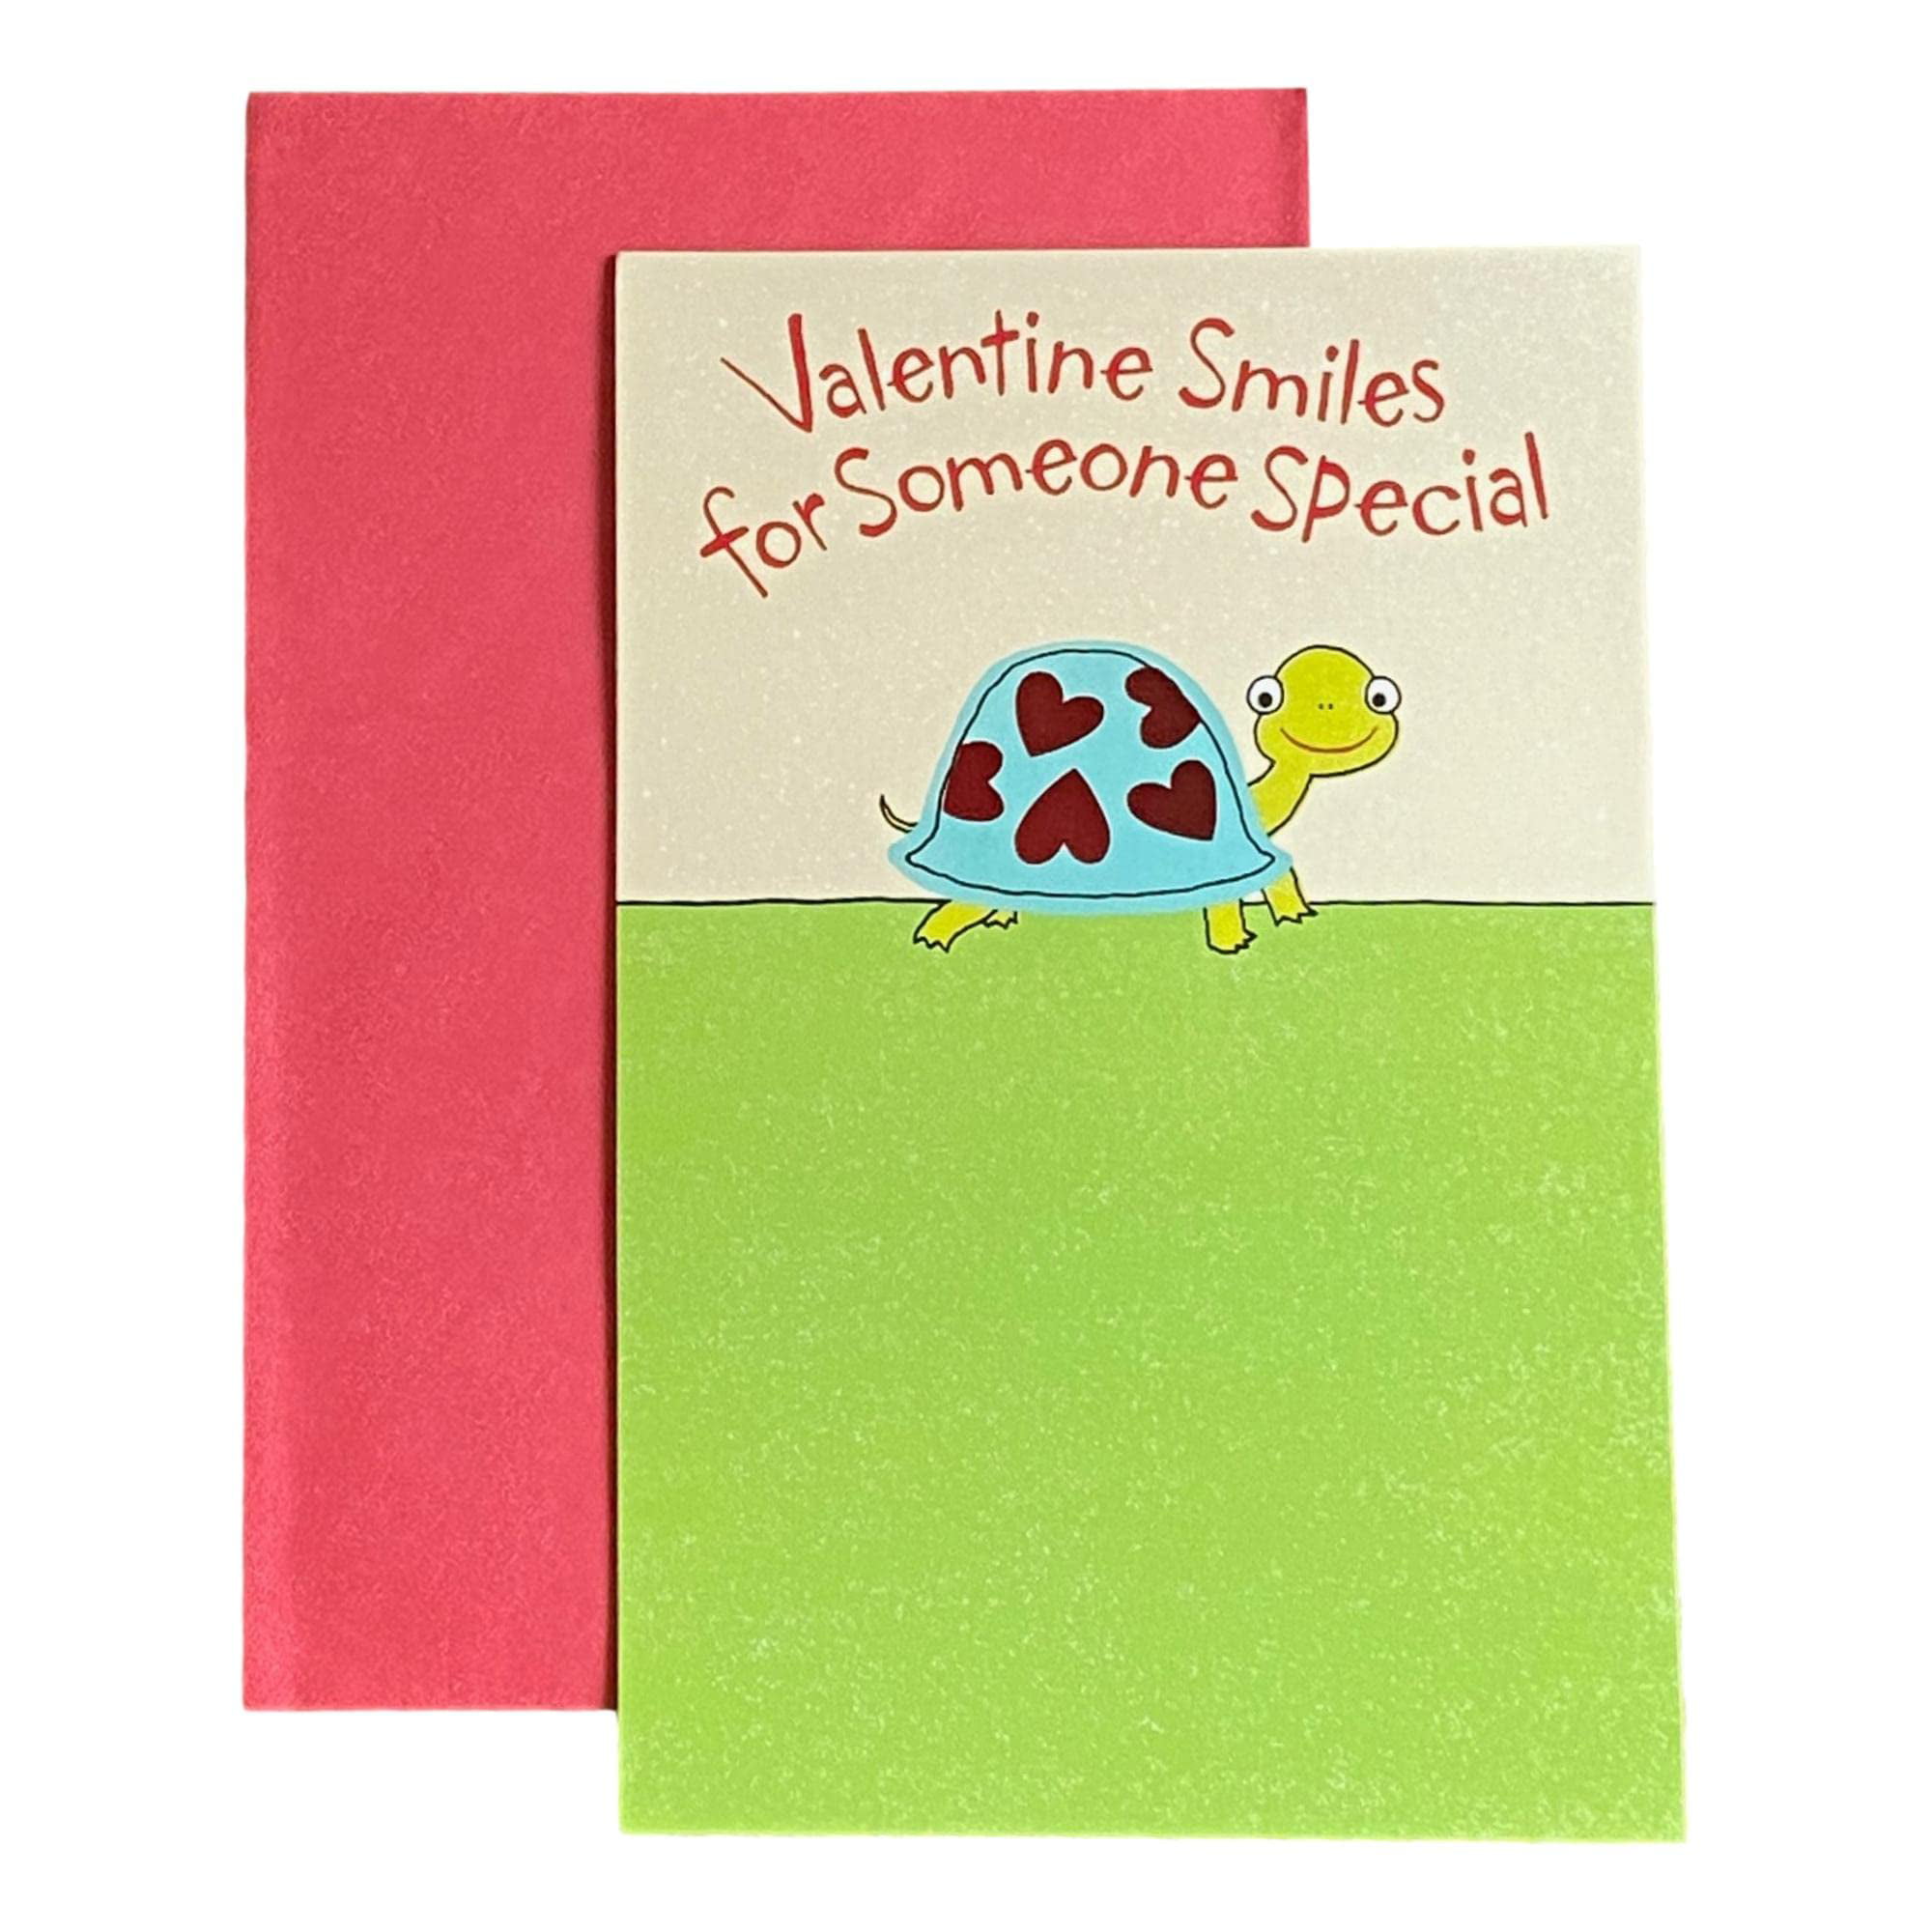 Details about   American Greetings Tender Thoughts Valentine's Day Card Mouse in heart 